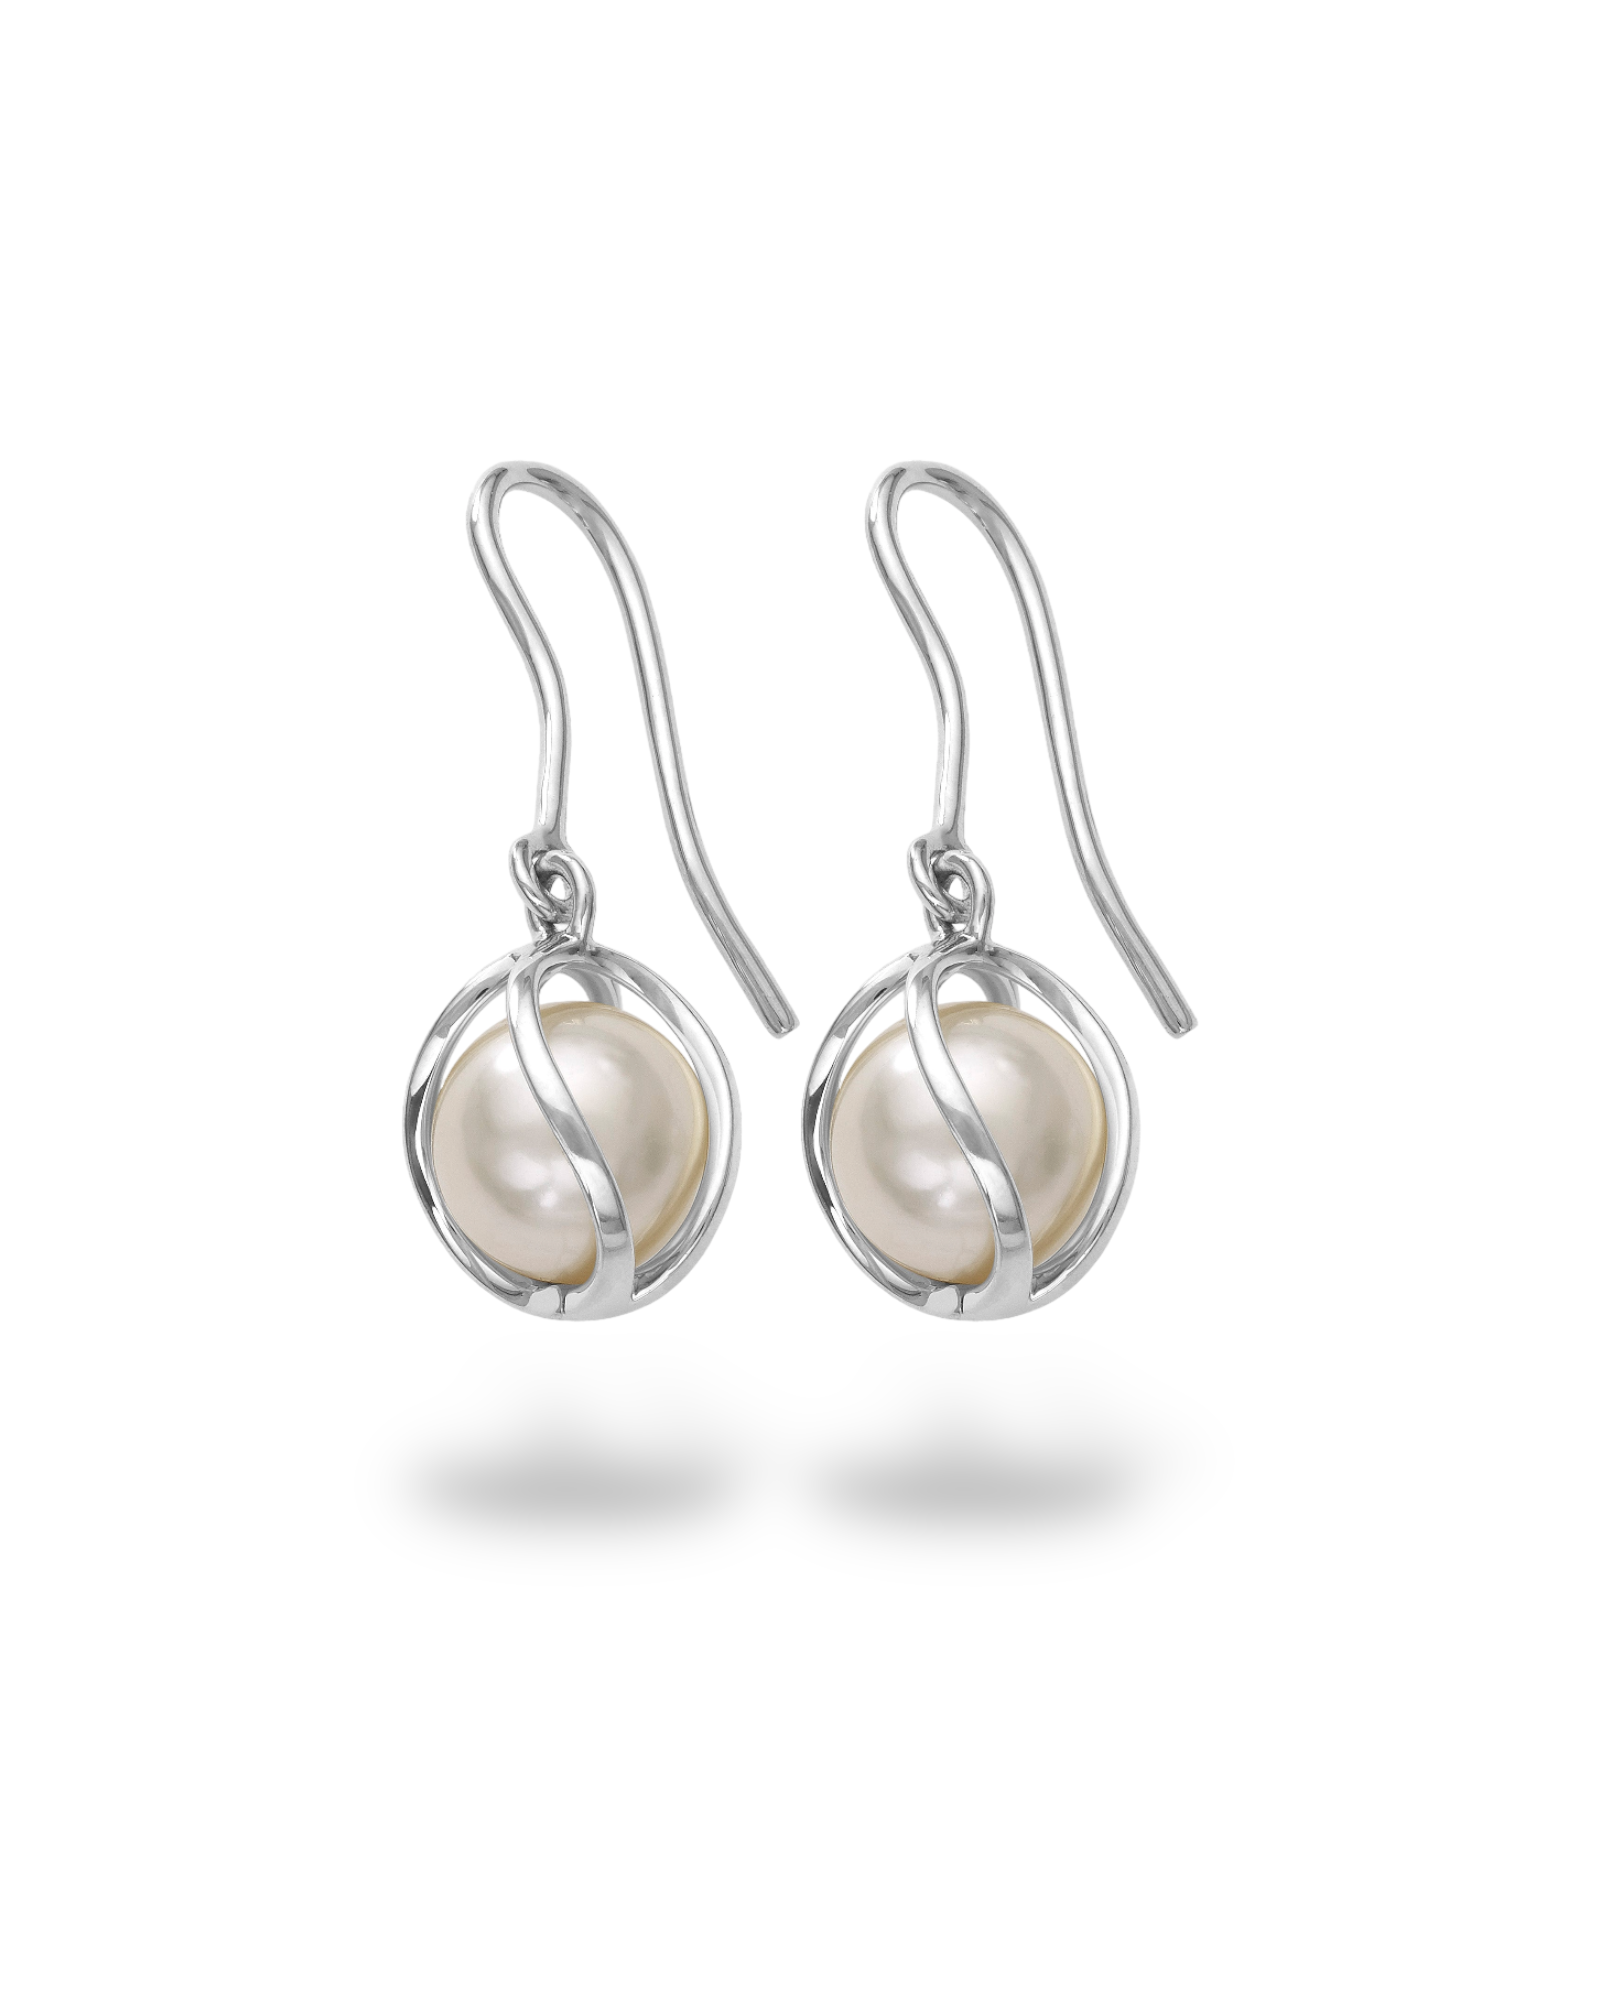 Suspension Earrings from Devam with Pearls and White Gold